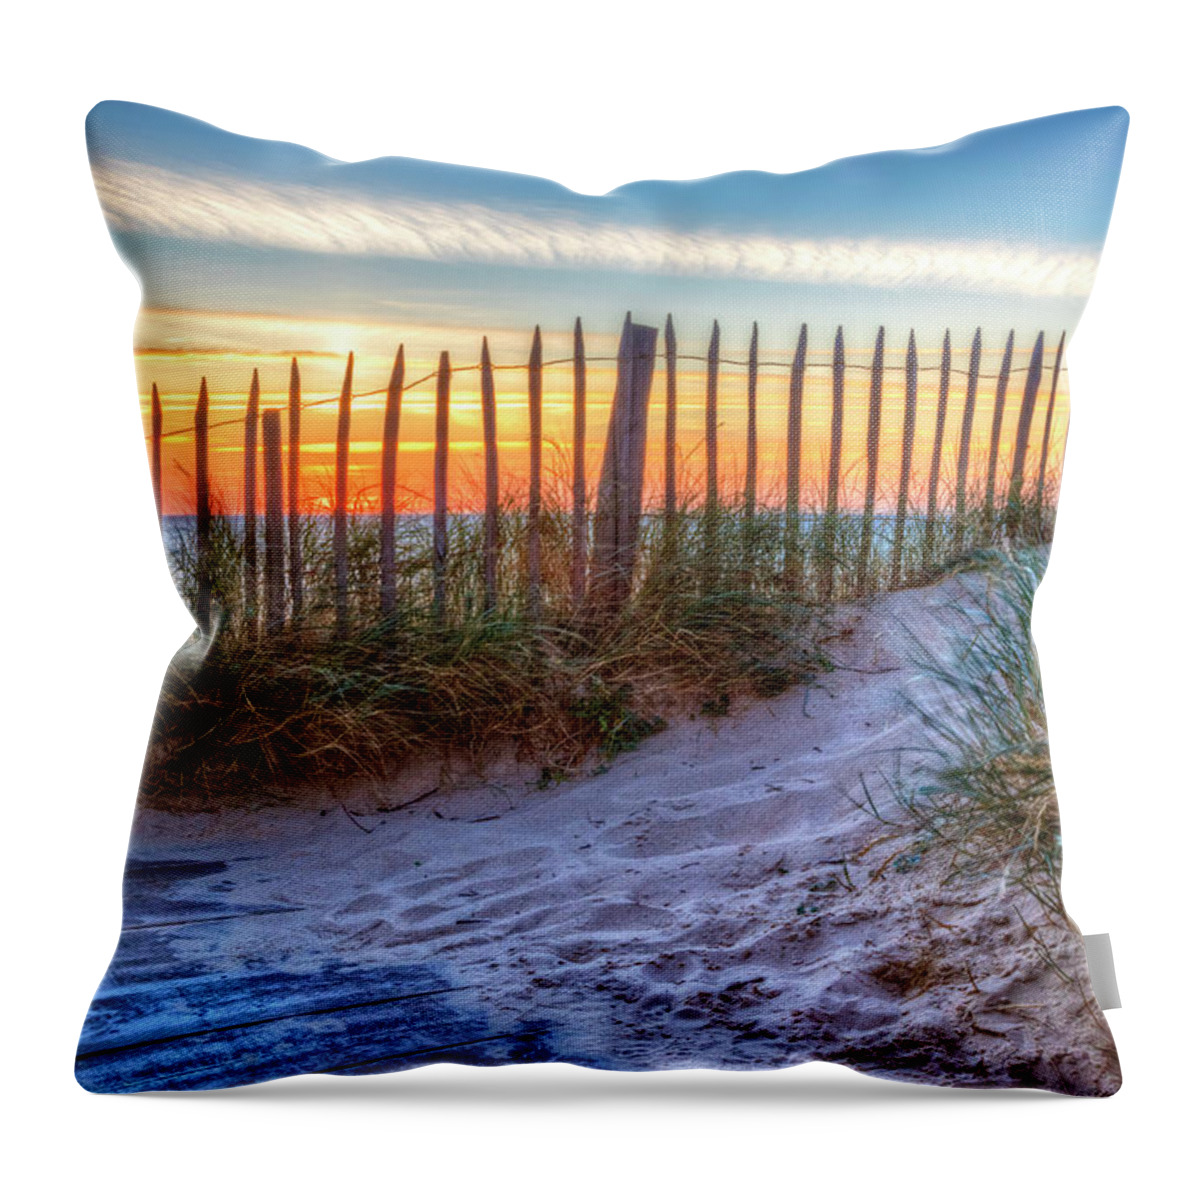 Clouds Throw Pillow featuring the photograph White Sands by Debra and Dave Vanderlaan